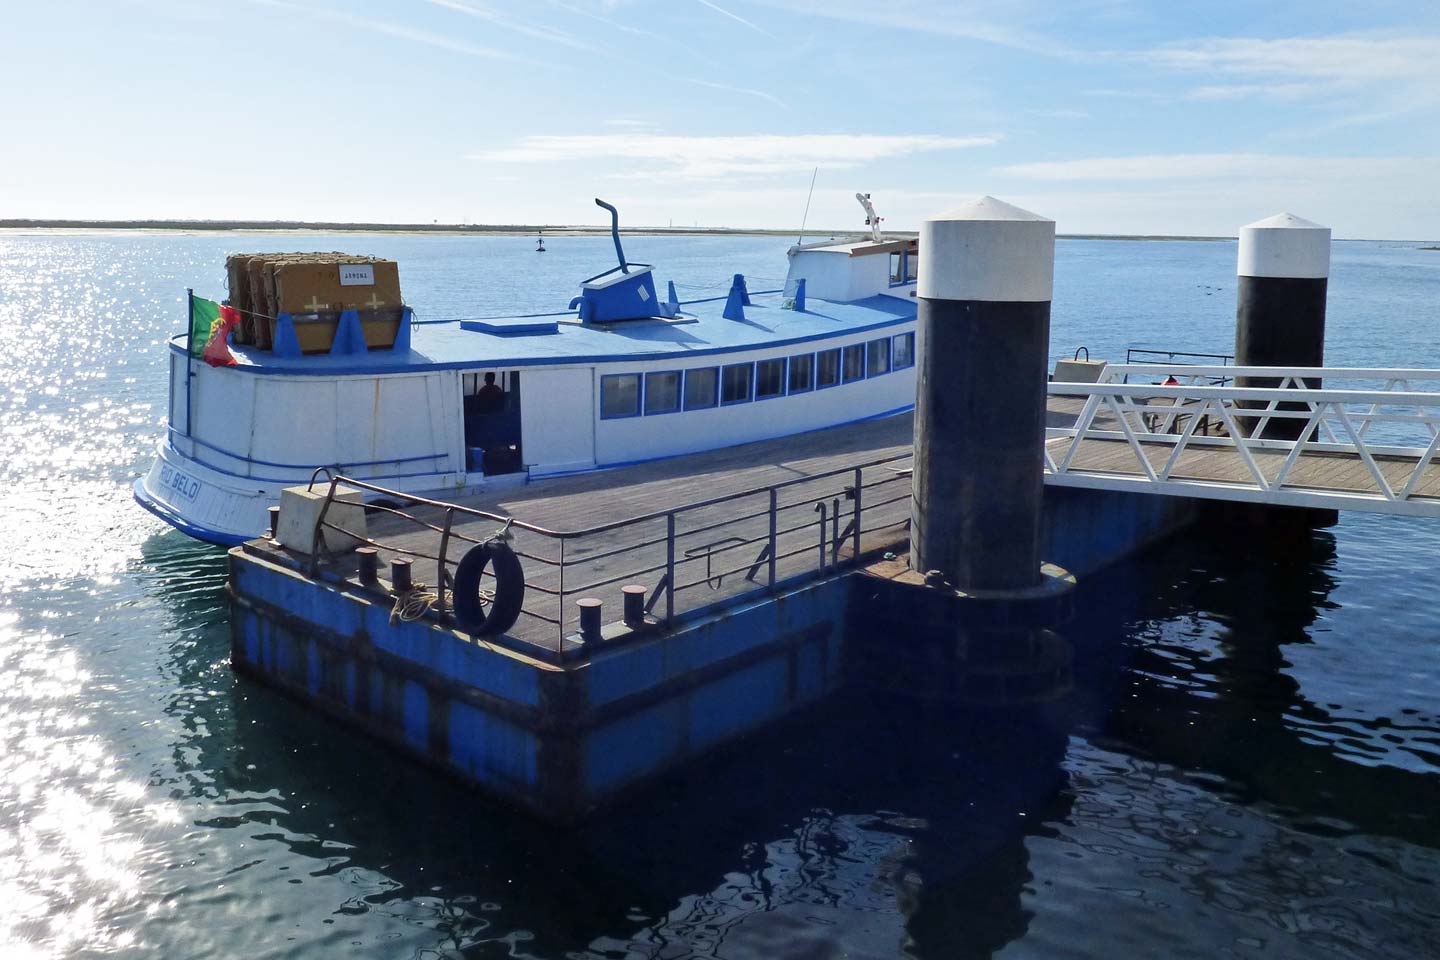 A Photo of the Armona ferry in Olhao